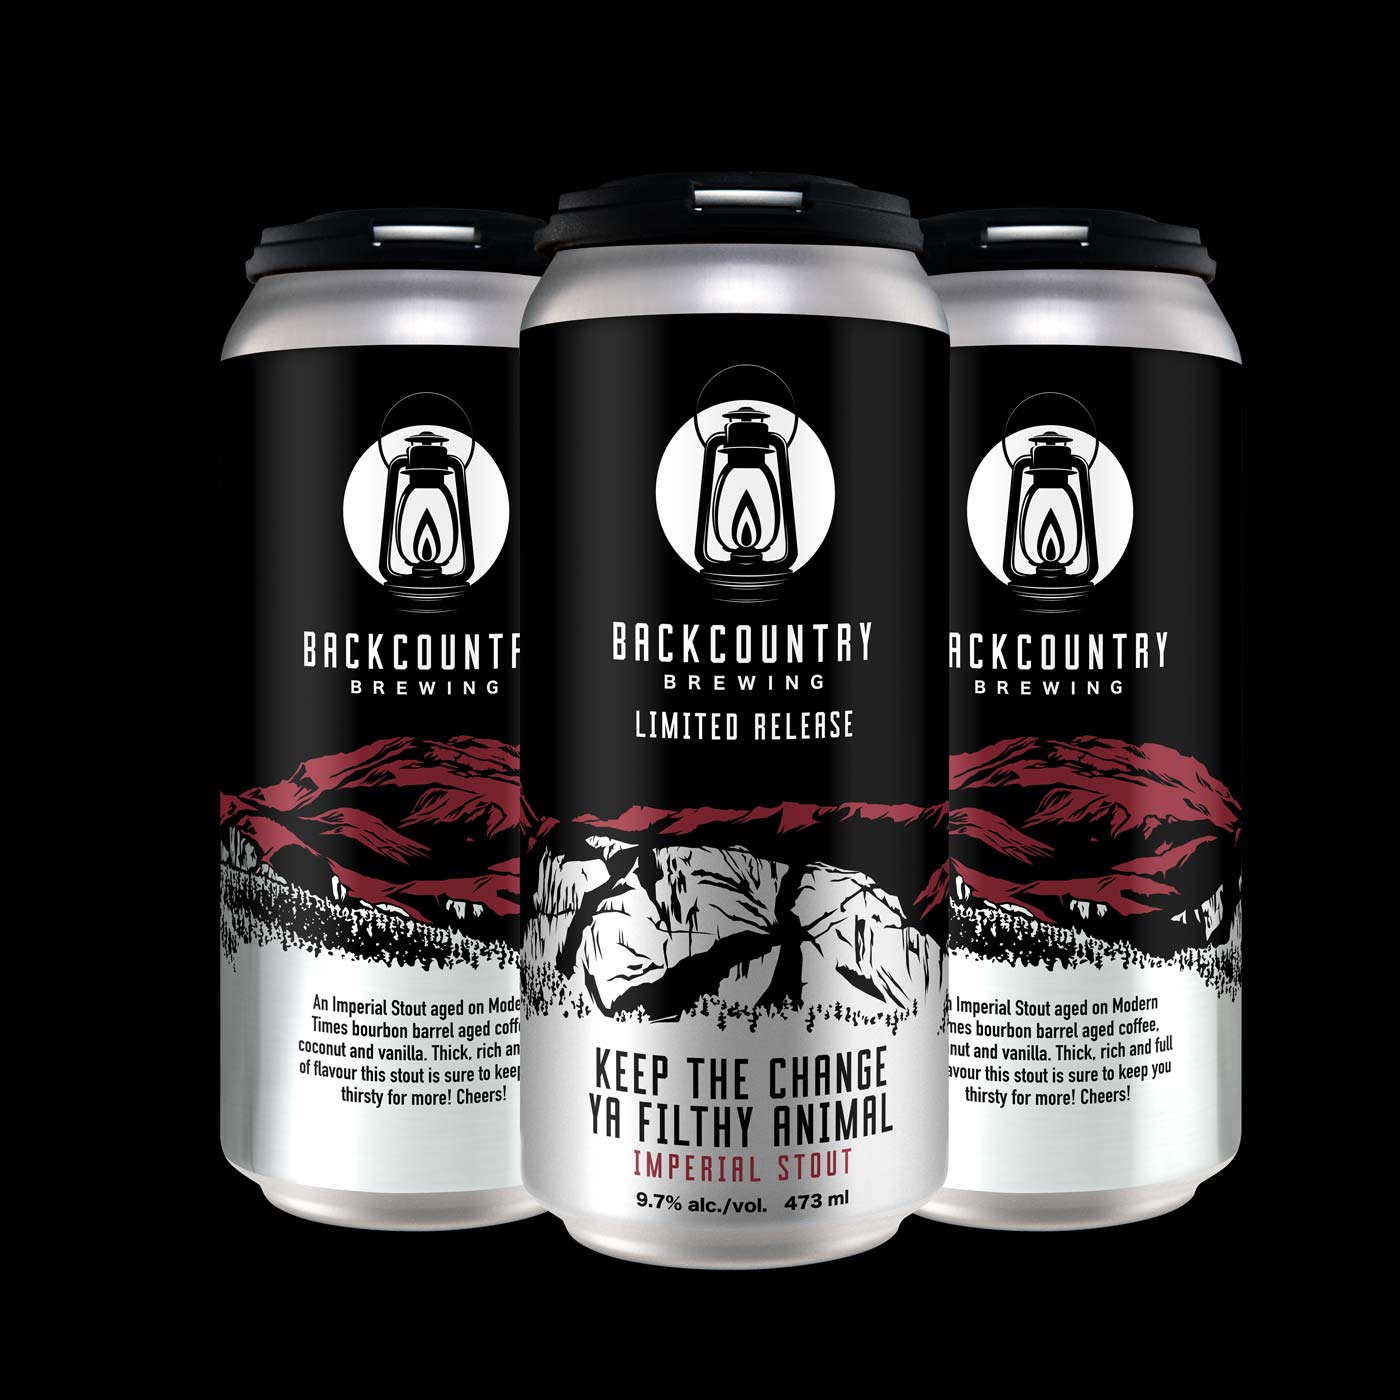 Backcountry Brewing - Keep The Change Ya Filthy Animal - Imperial Stout